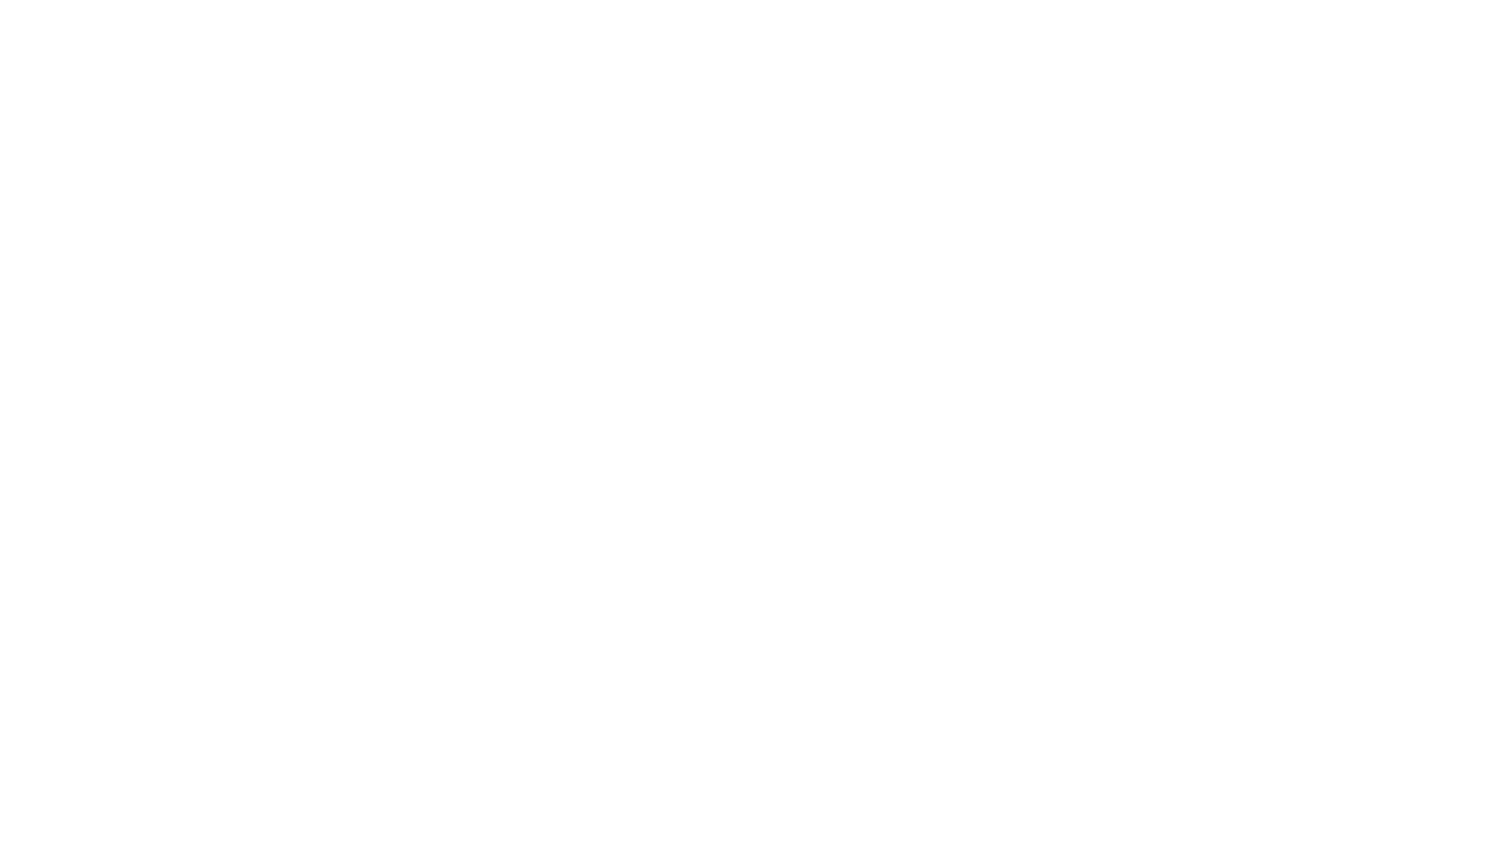 The Weller Group